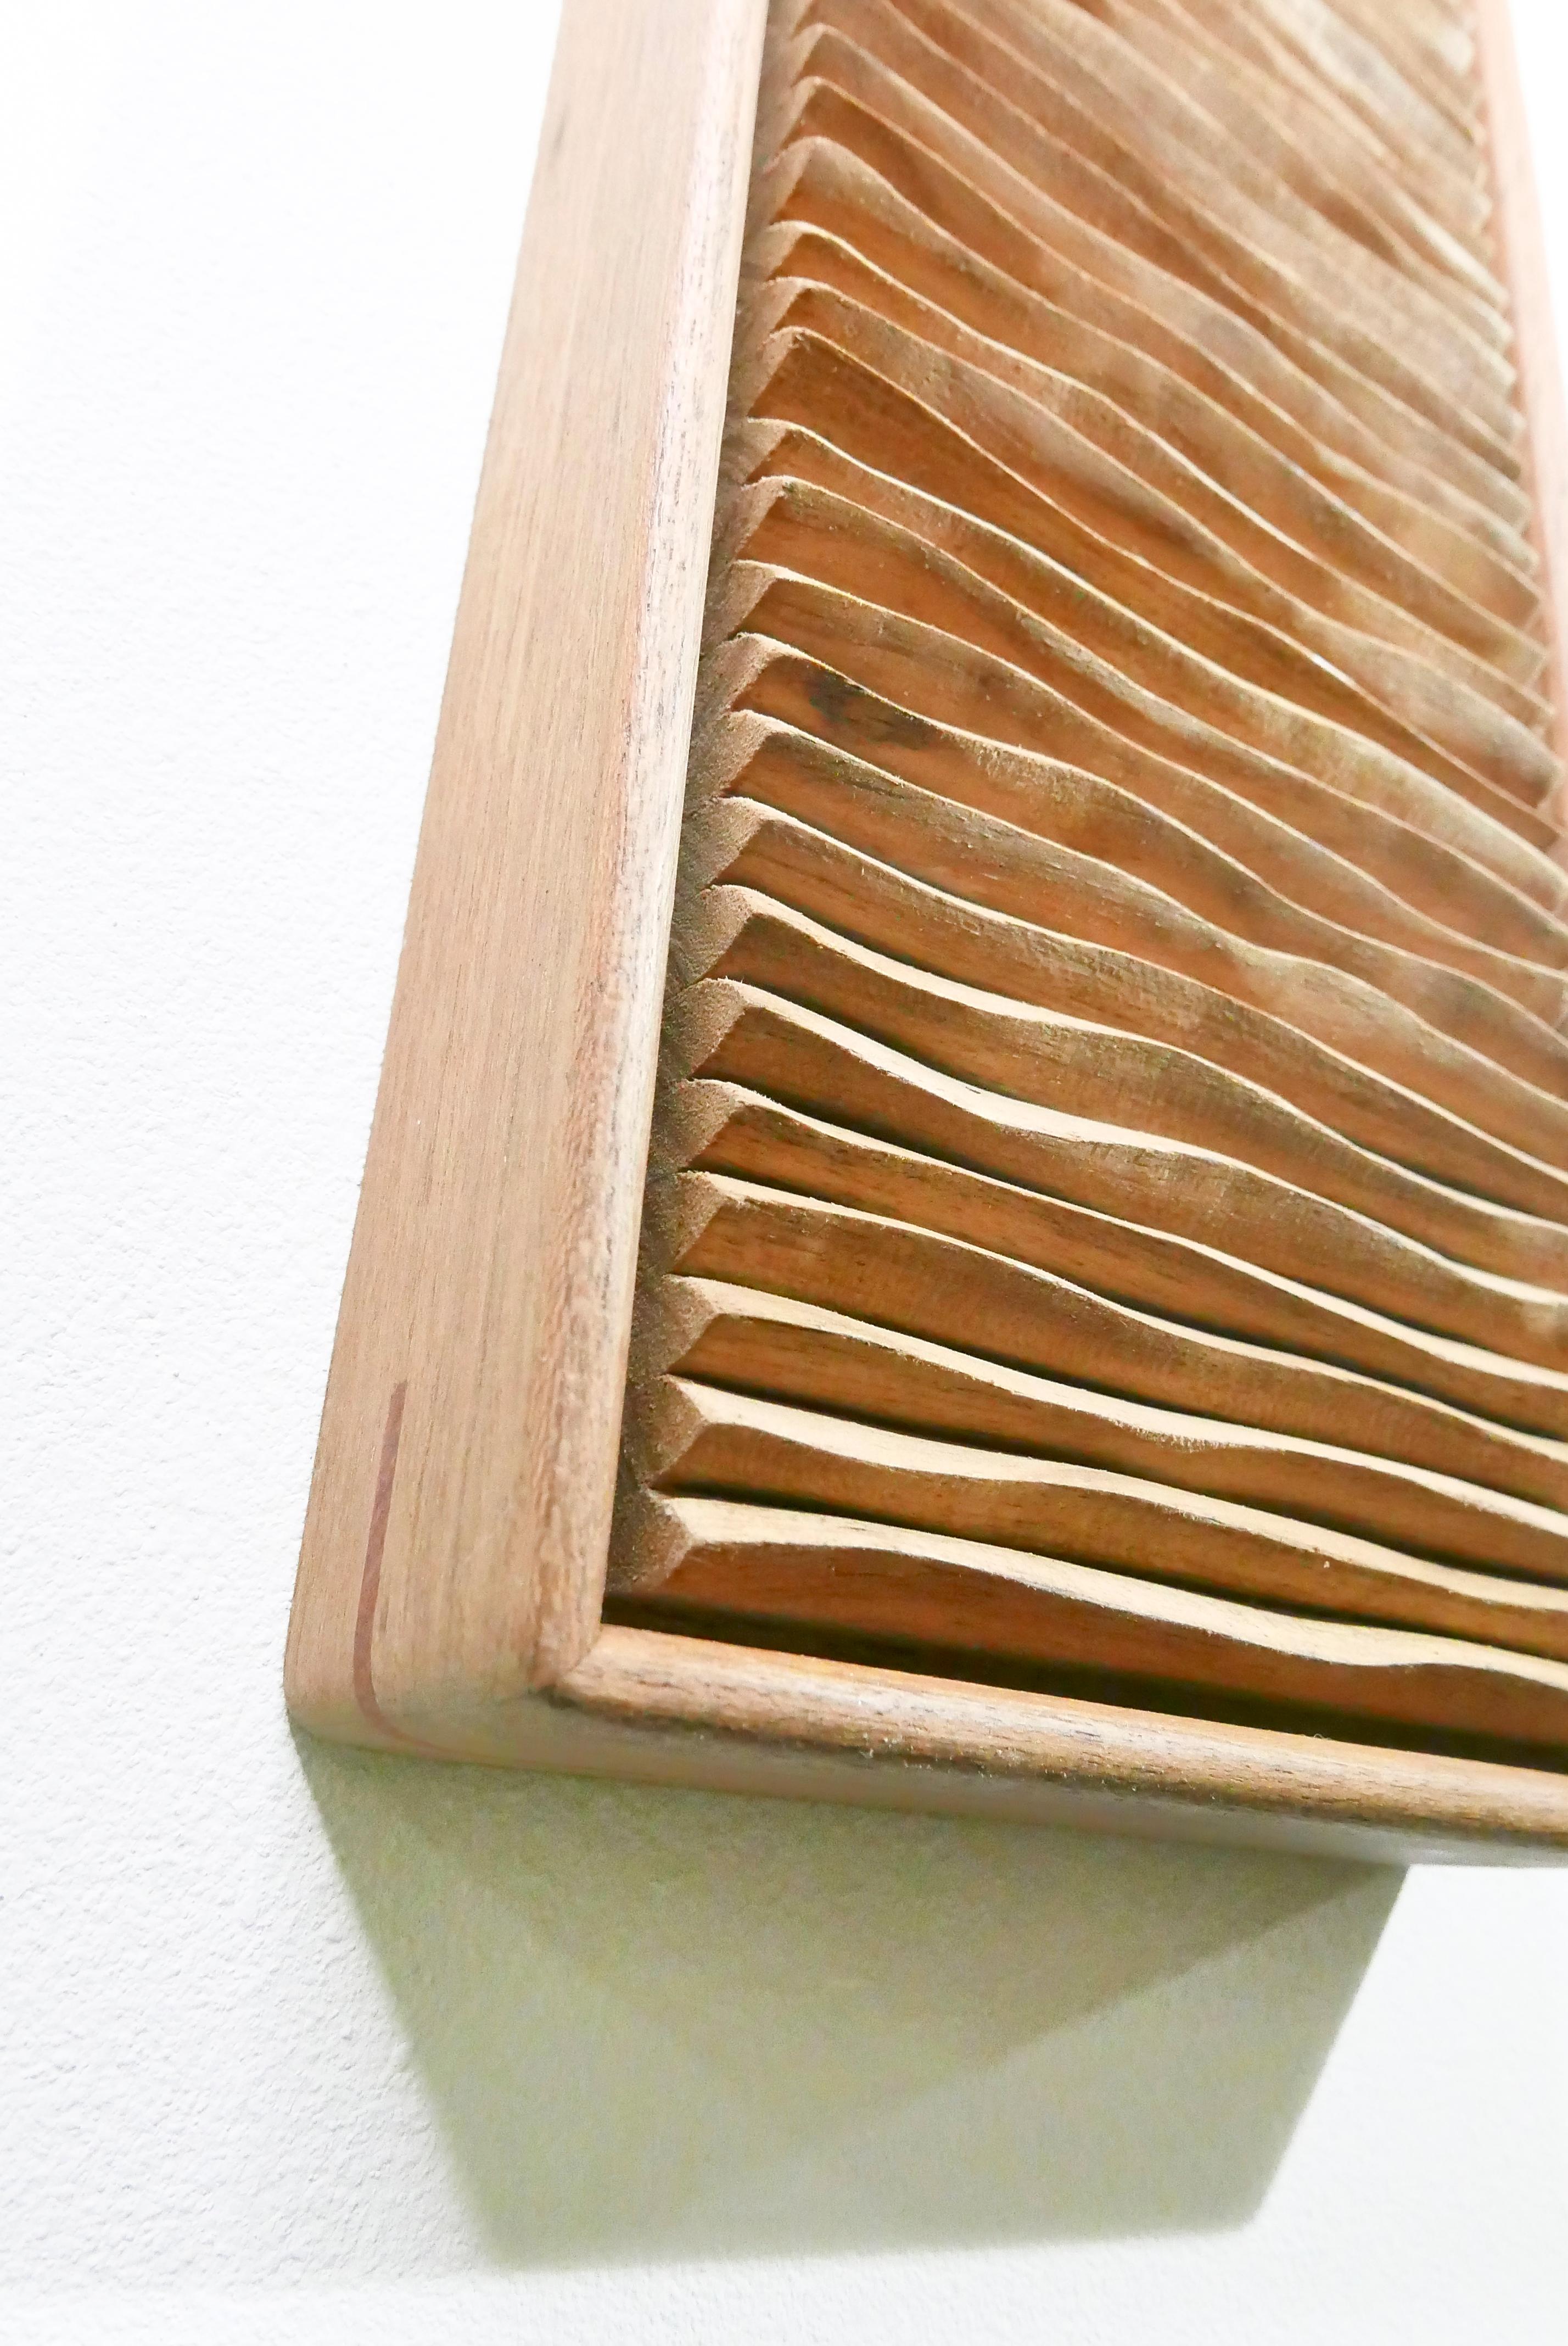 Brazilian Contemporary Wall Mounted Sculpture from 'Ripples' Series by James Rowland  For Sale